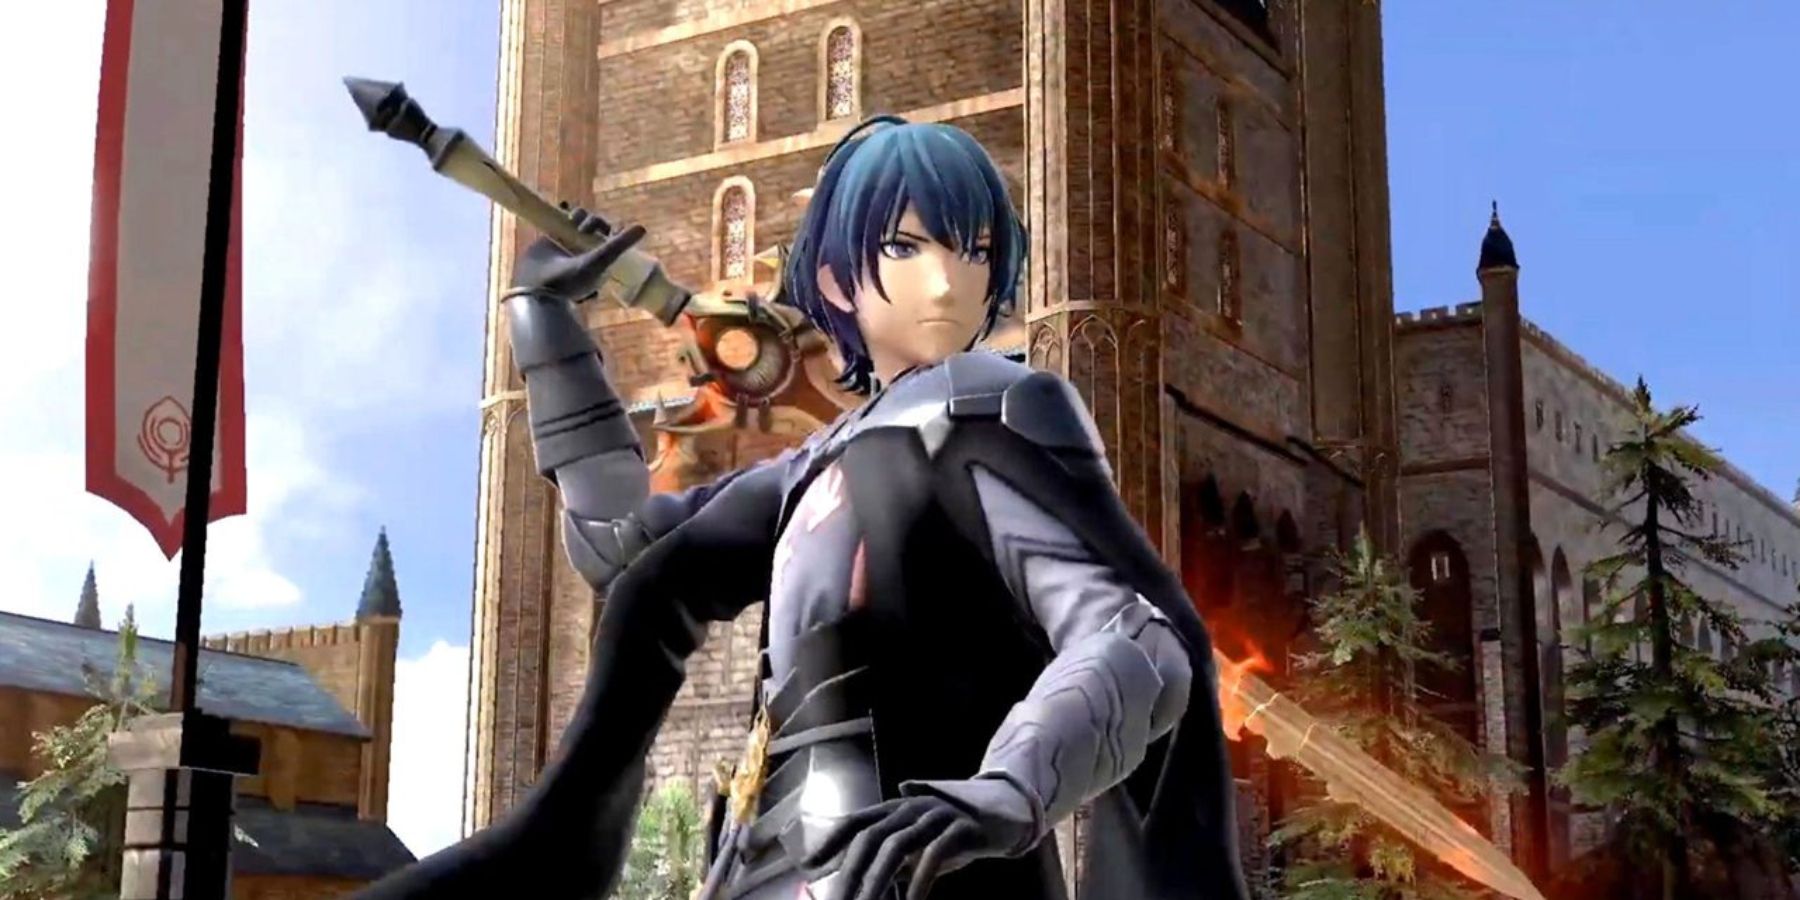 Super Smash Bros Every Fire Emblem Character Ranked